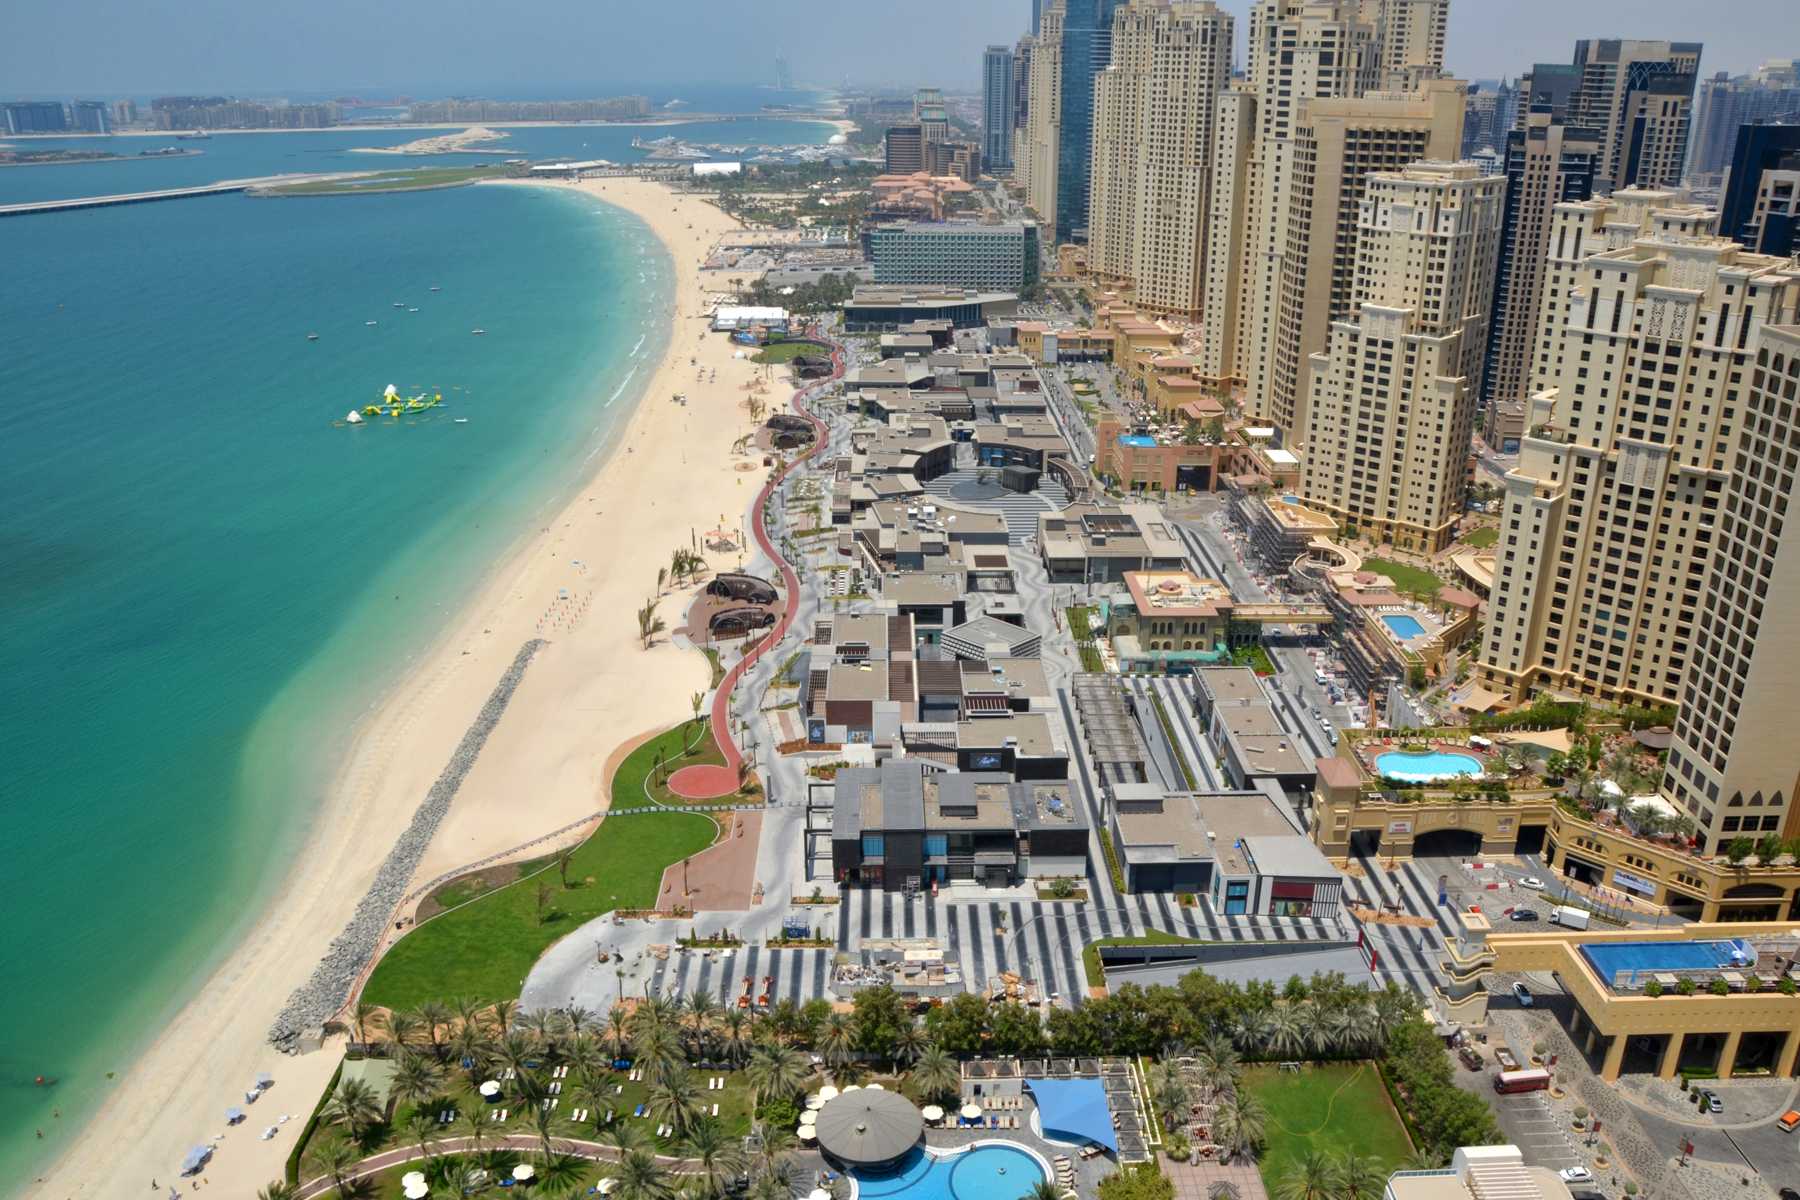 1581258887 602 New beautiful tourist places in Dubai for families - New beautiful tourist places in Dubai for families